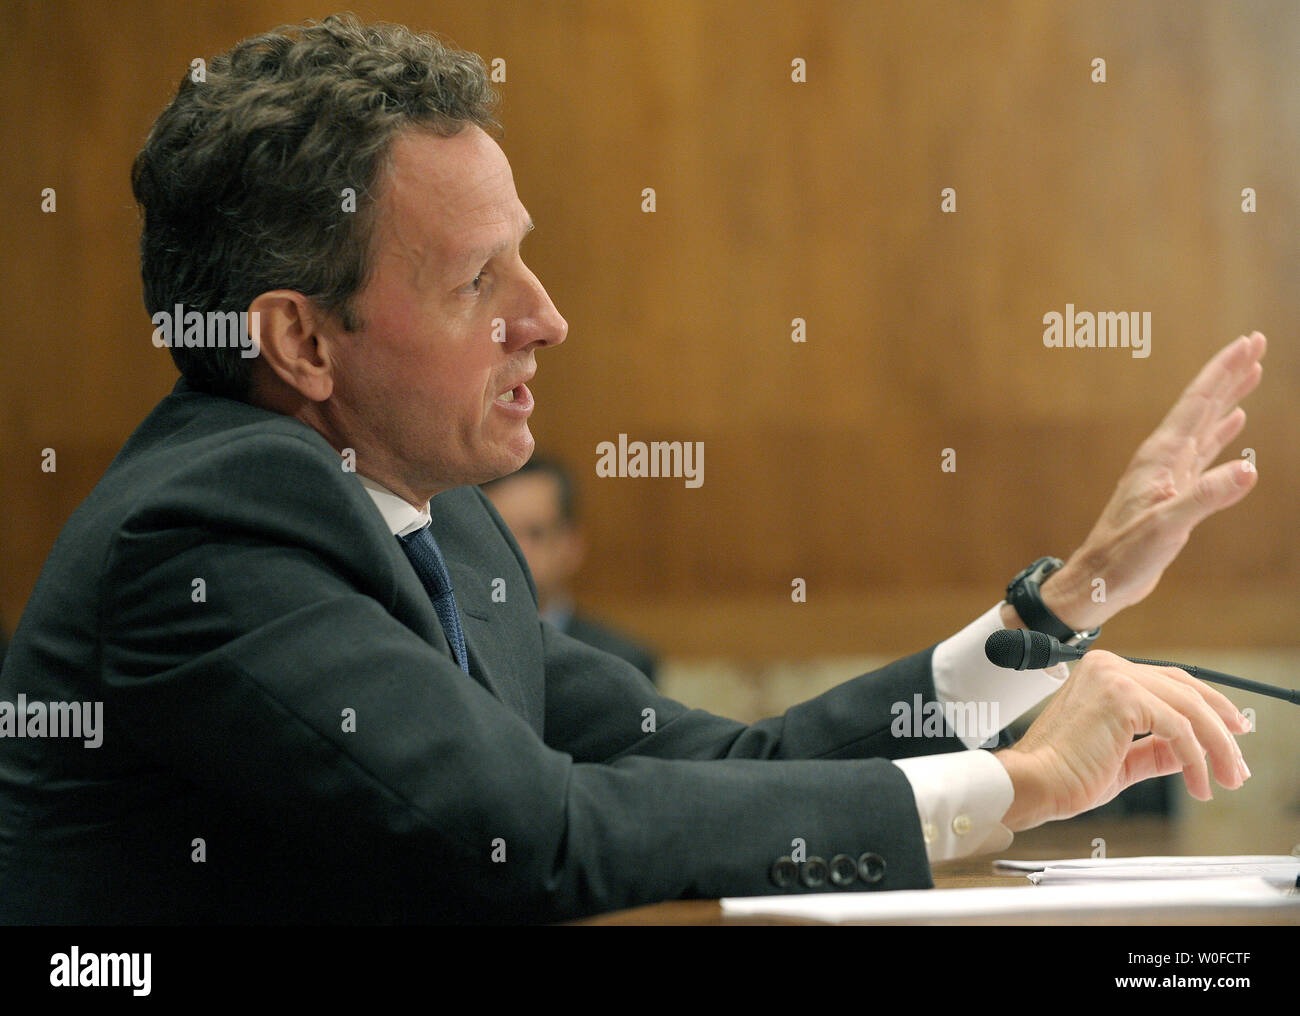 Treasury Secretary Timothy Geithner discusses the current status of the Troubled Asset Relief Program (TARP) with The Congressional Oversight Panel, created to oversee the expenditure of TARP money, on Capitol Hill in Washington on December 10, 2009.   UPI/Roger L. Wollenberg Stock Photo